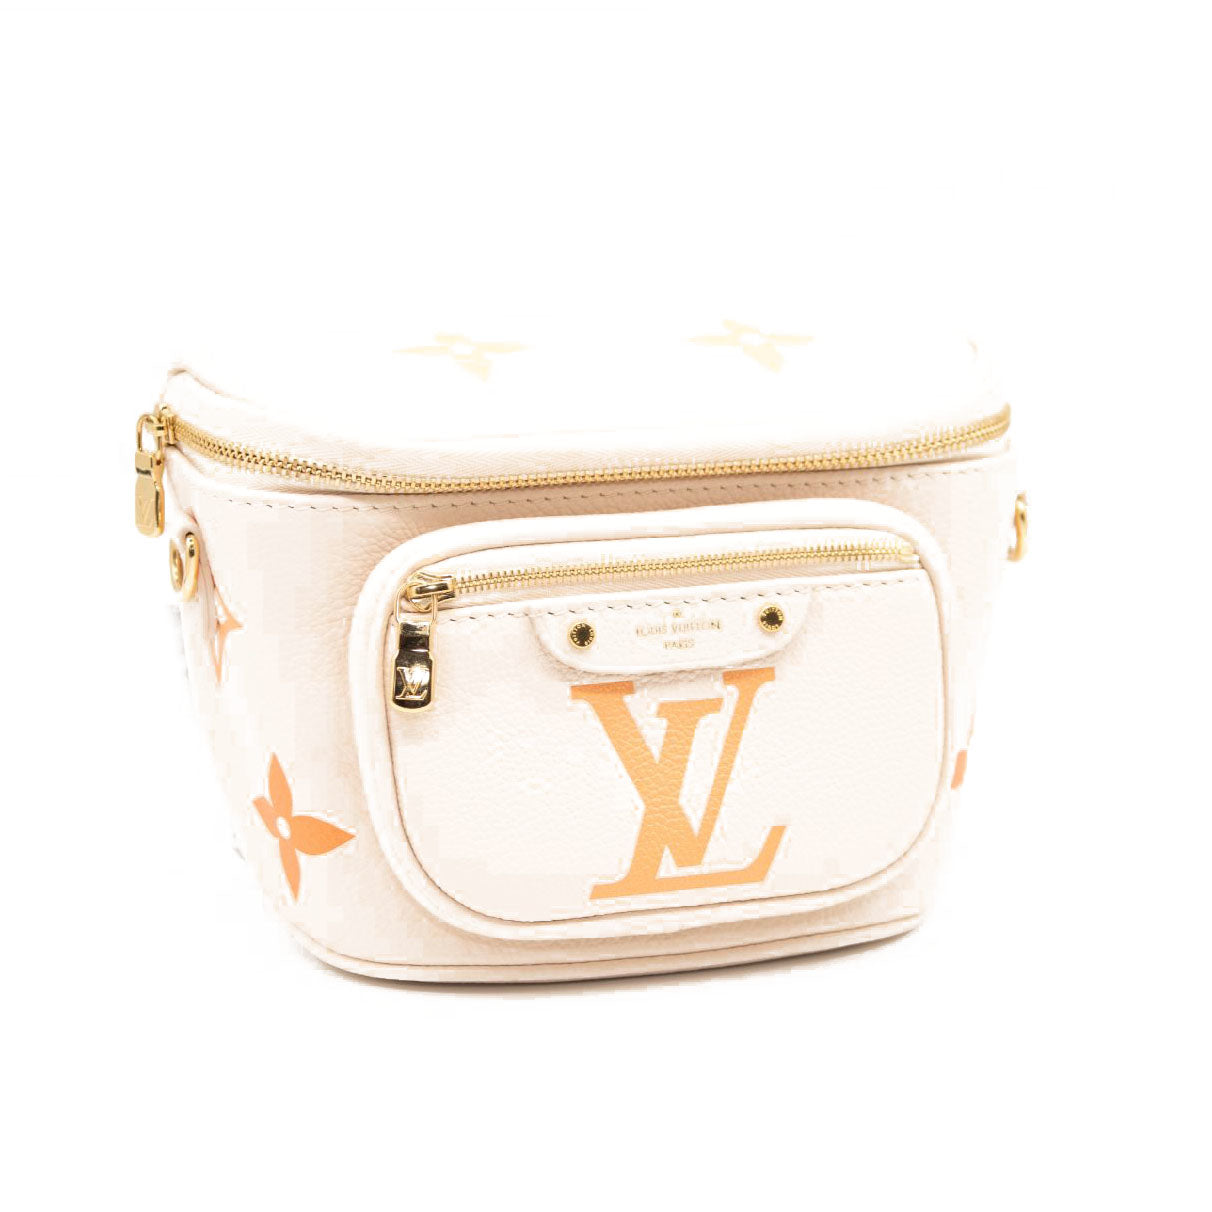 Mini Bumbag Monogram Empreinte Leather - Wallets and Small Leather